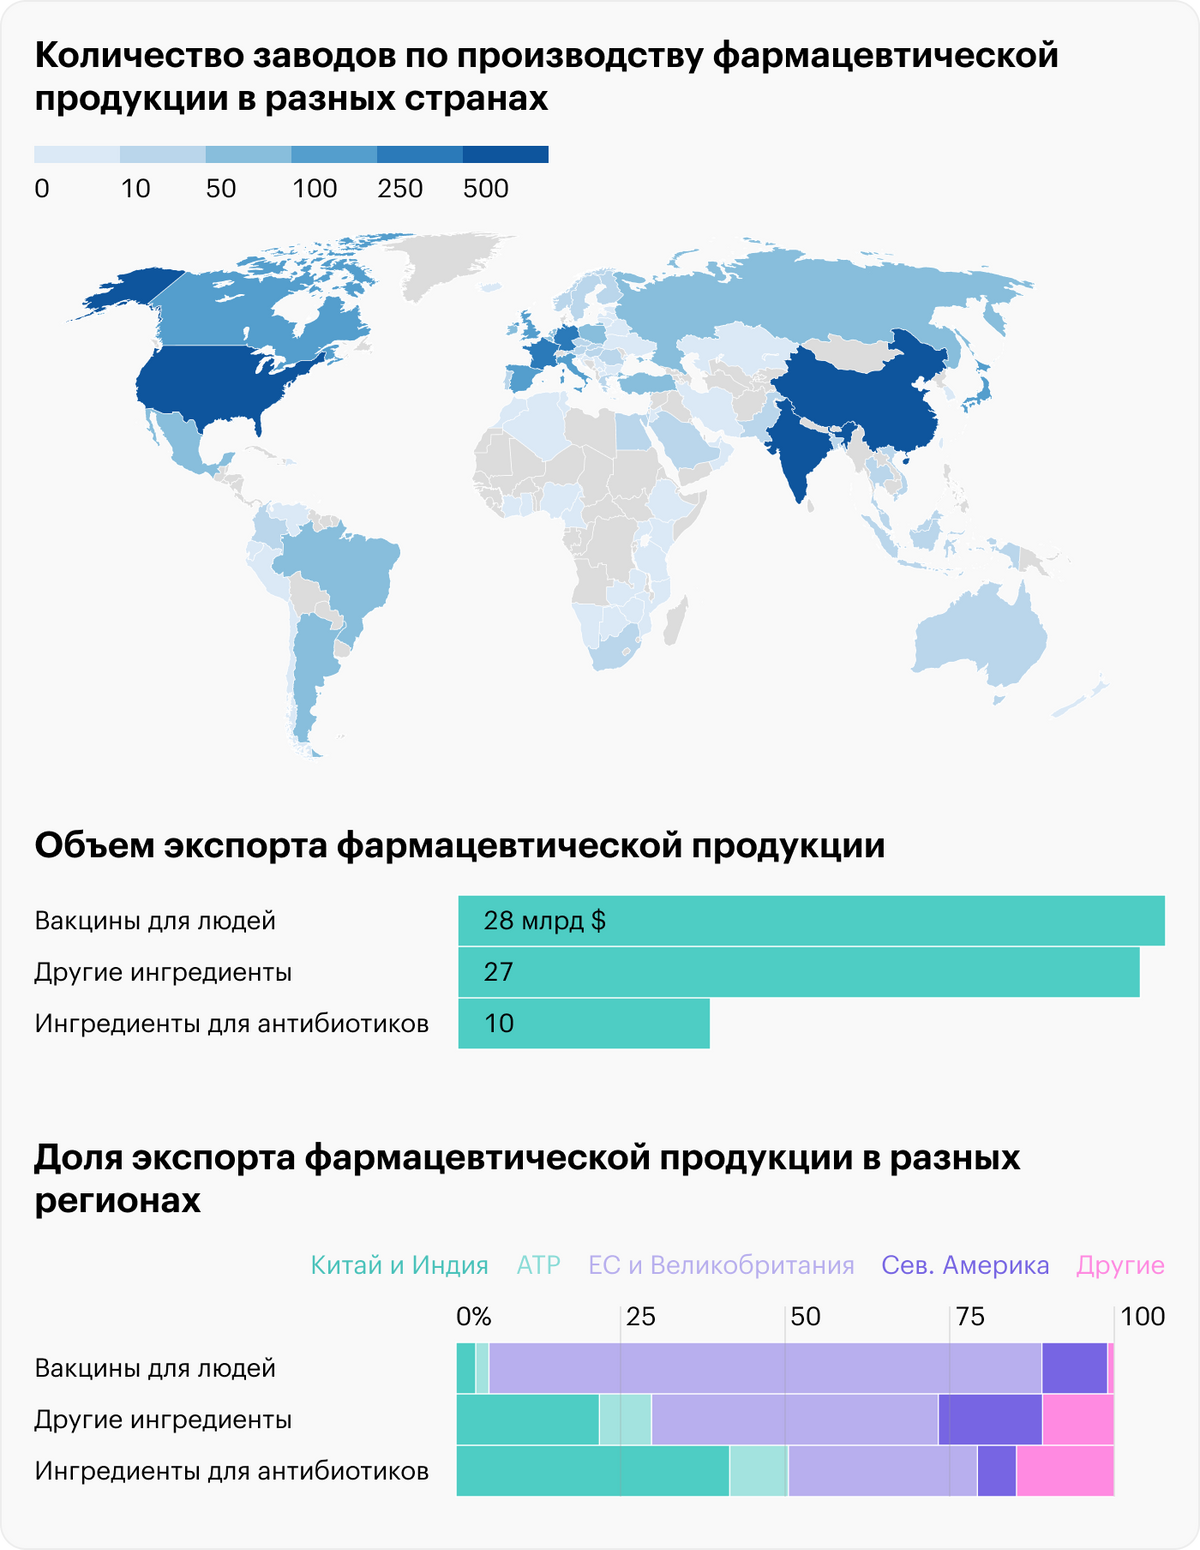 Источник: McKinsey, Risk, resilience, and&nbsp;rebalancing in global value chains, стр.&nbsp;64&nbsp;(74)